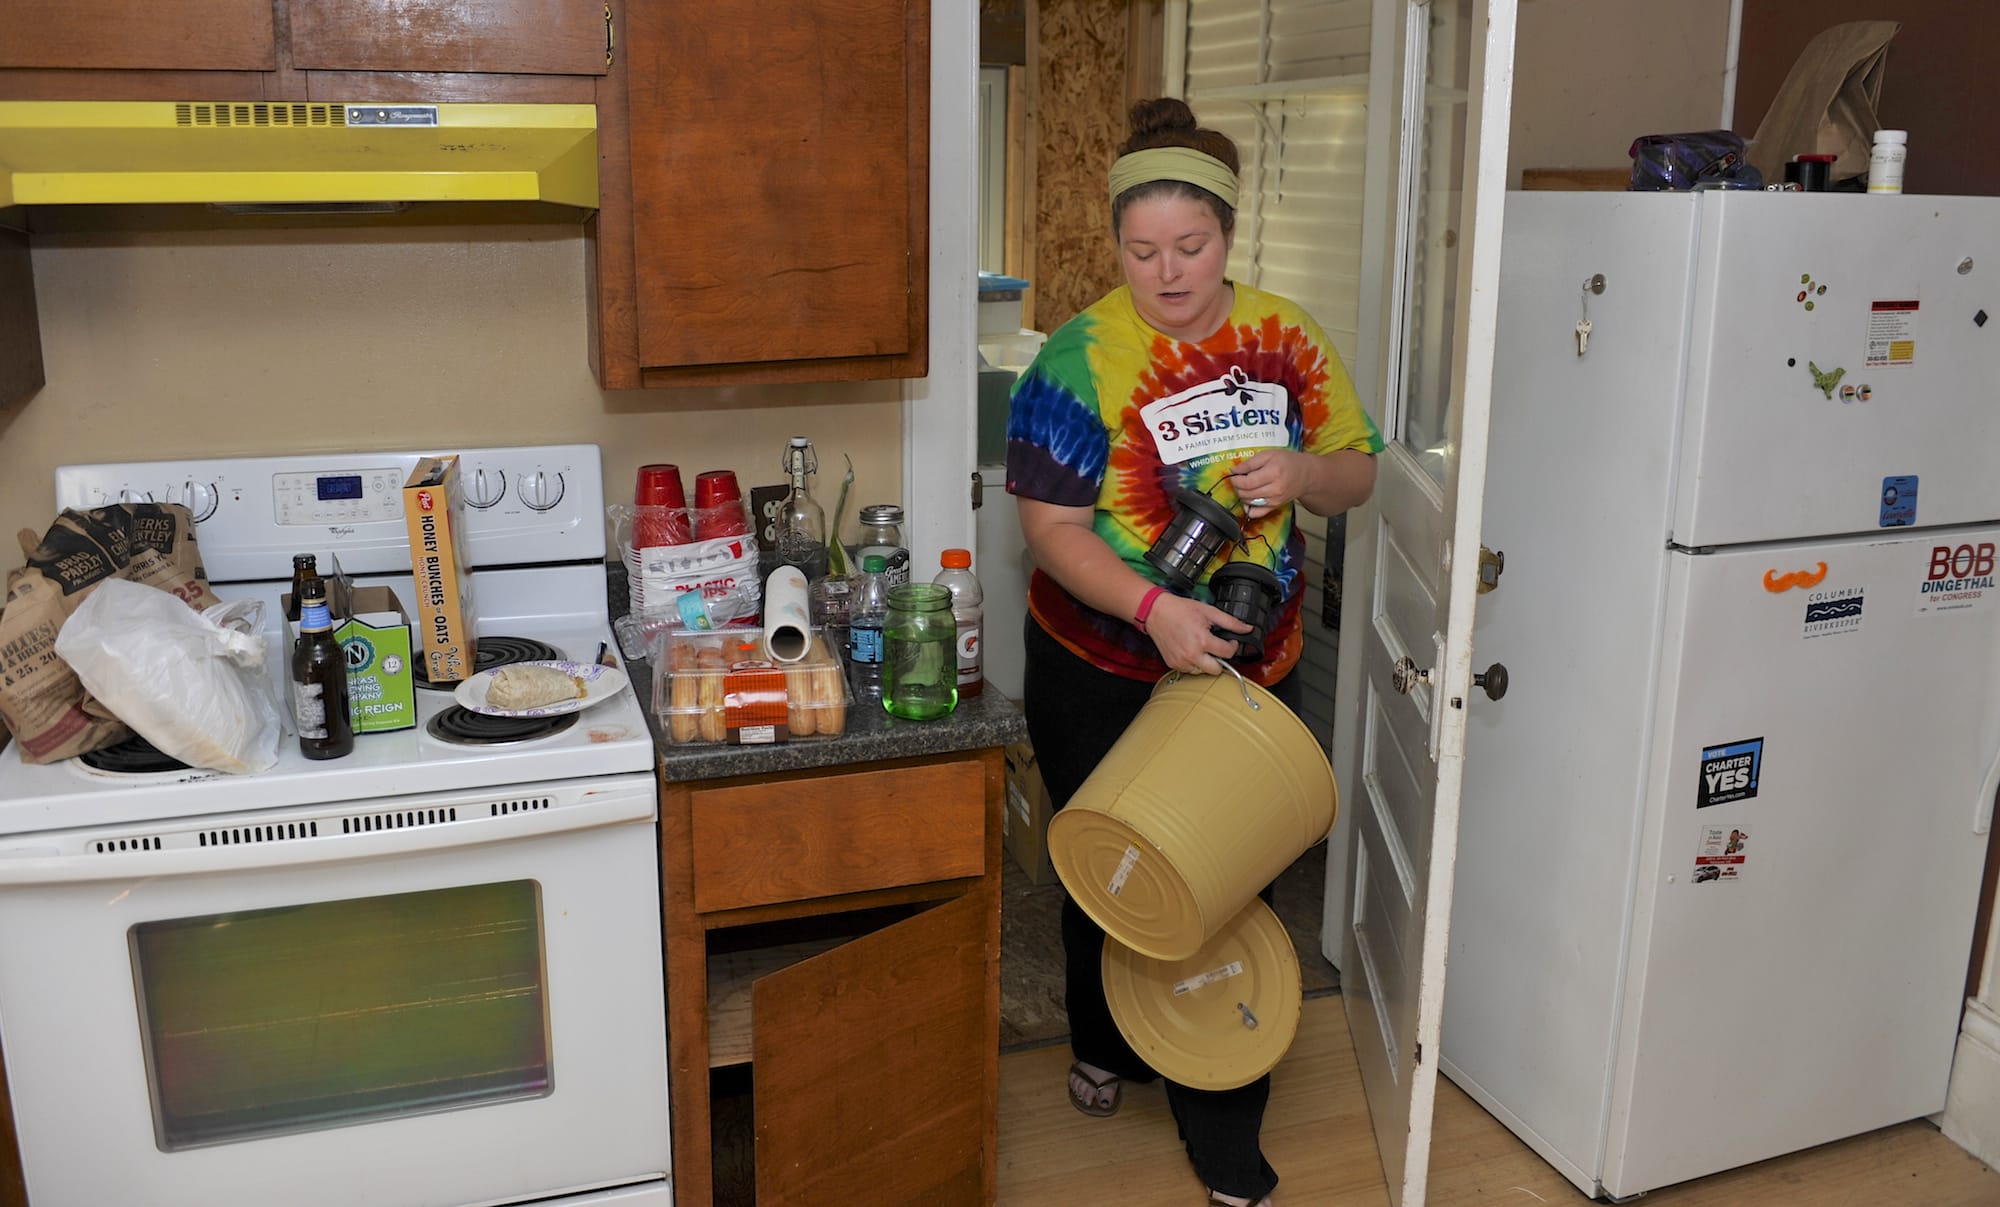 Audrey Miller moves from her rental house Aug. 23 in Vancouver. Miller and her roommate, Melissa Boles, struggled to find affordable housing in the area after their landlord sold their house.